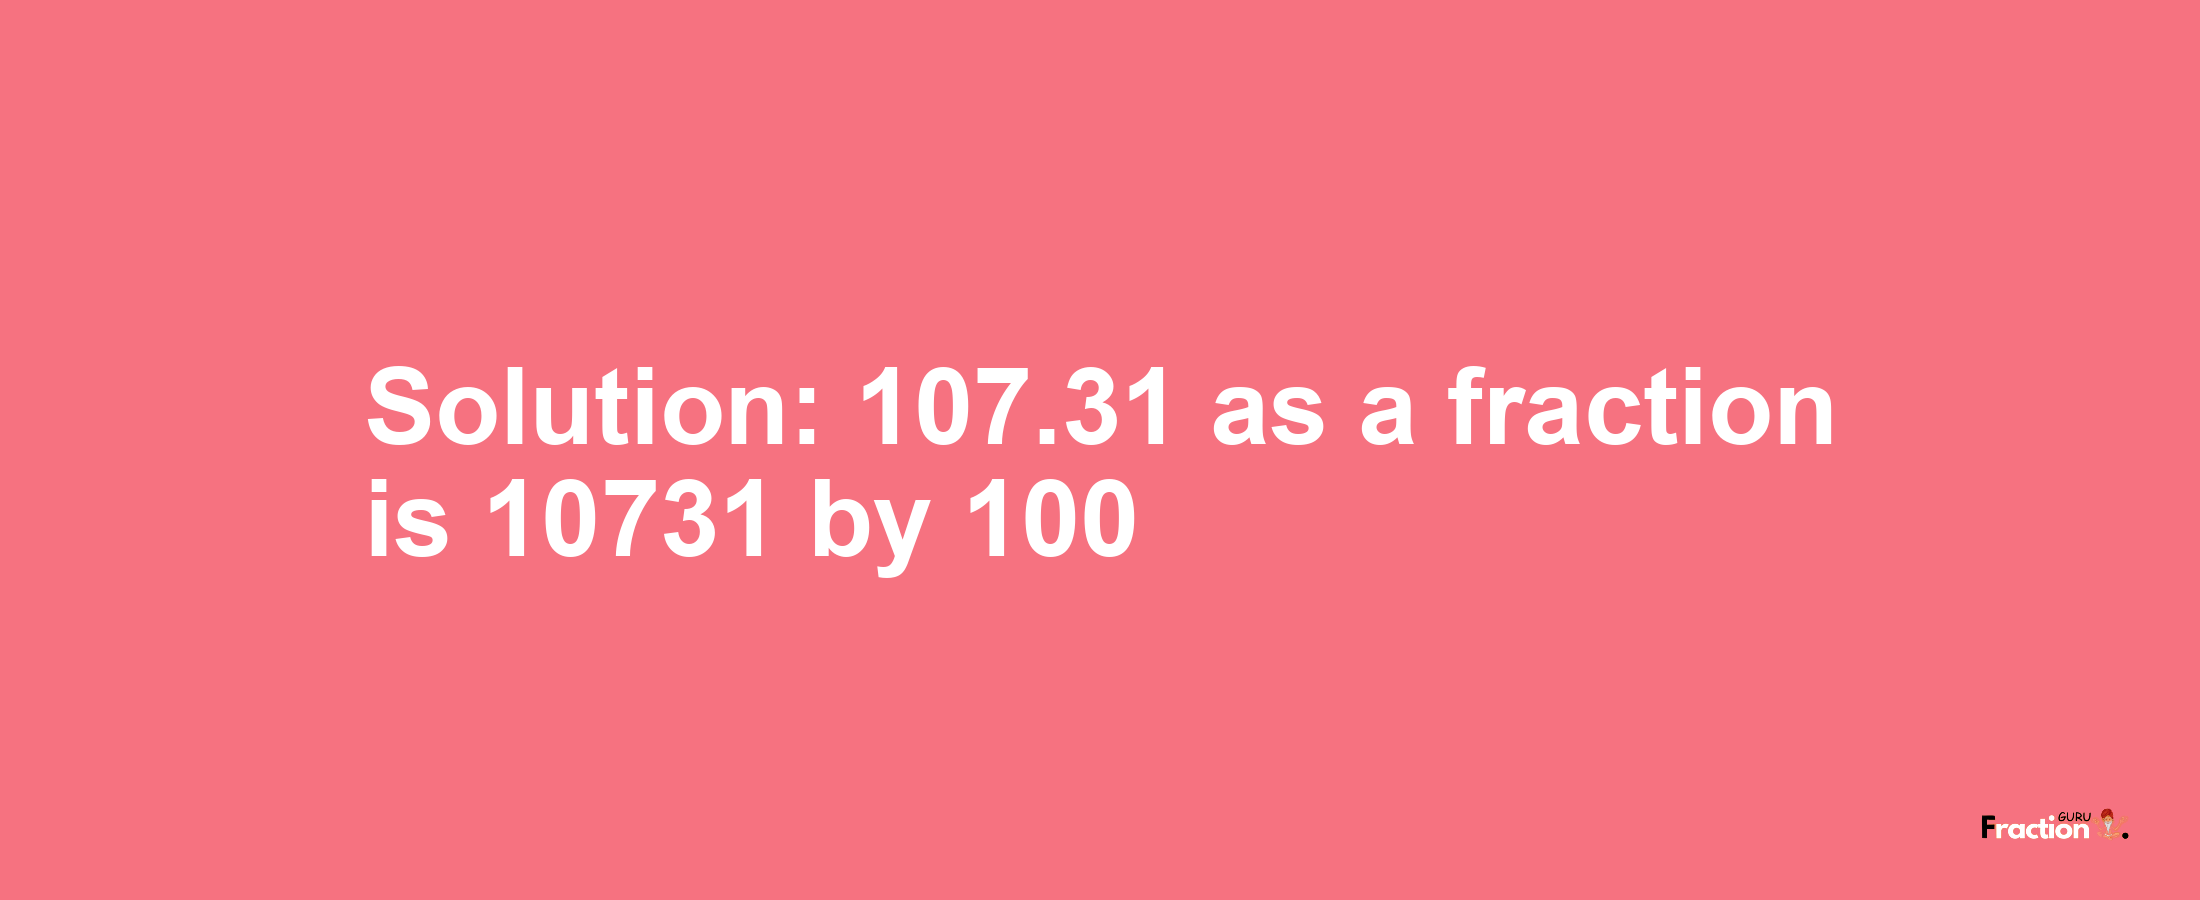 Solution:107.31 as a fraction is 10731/100